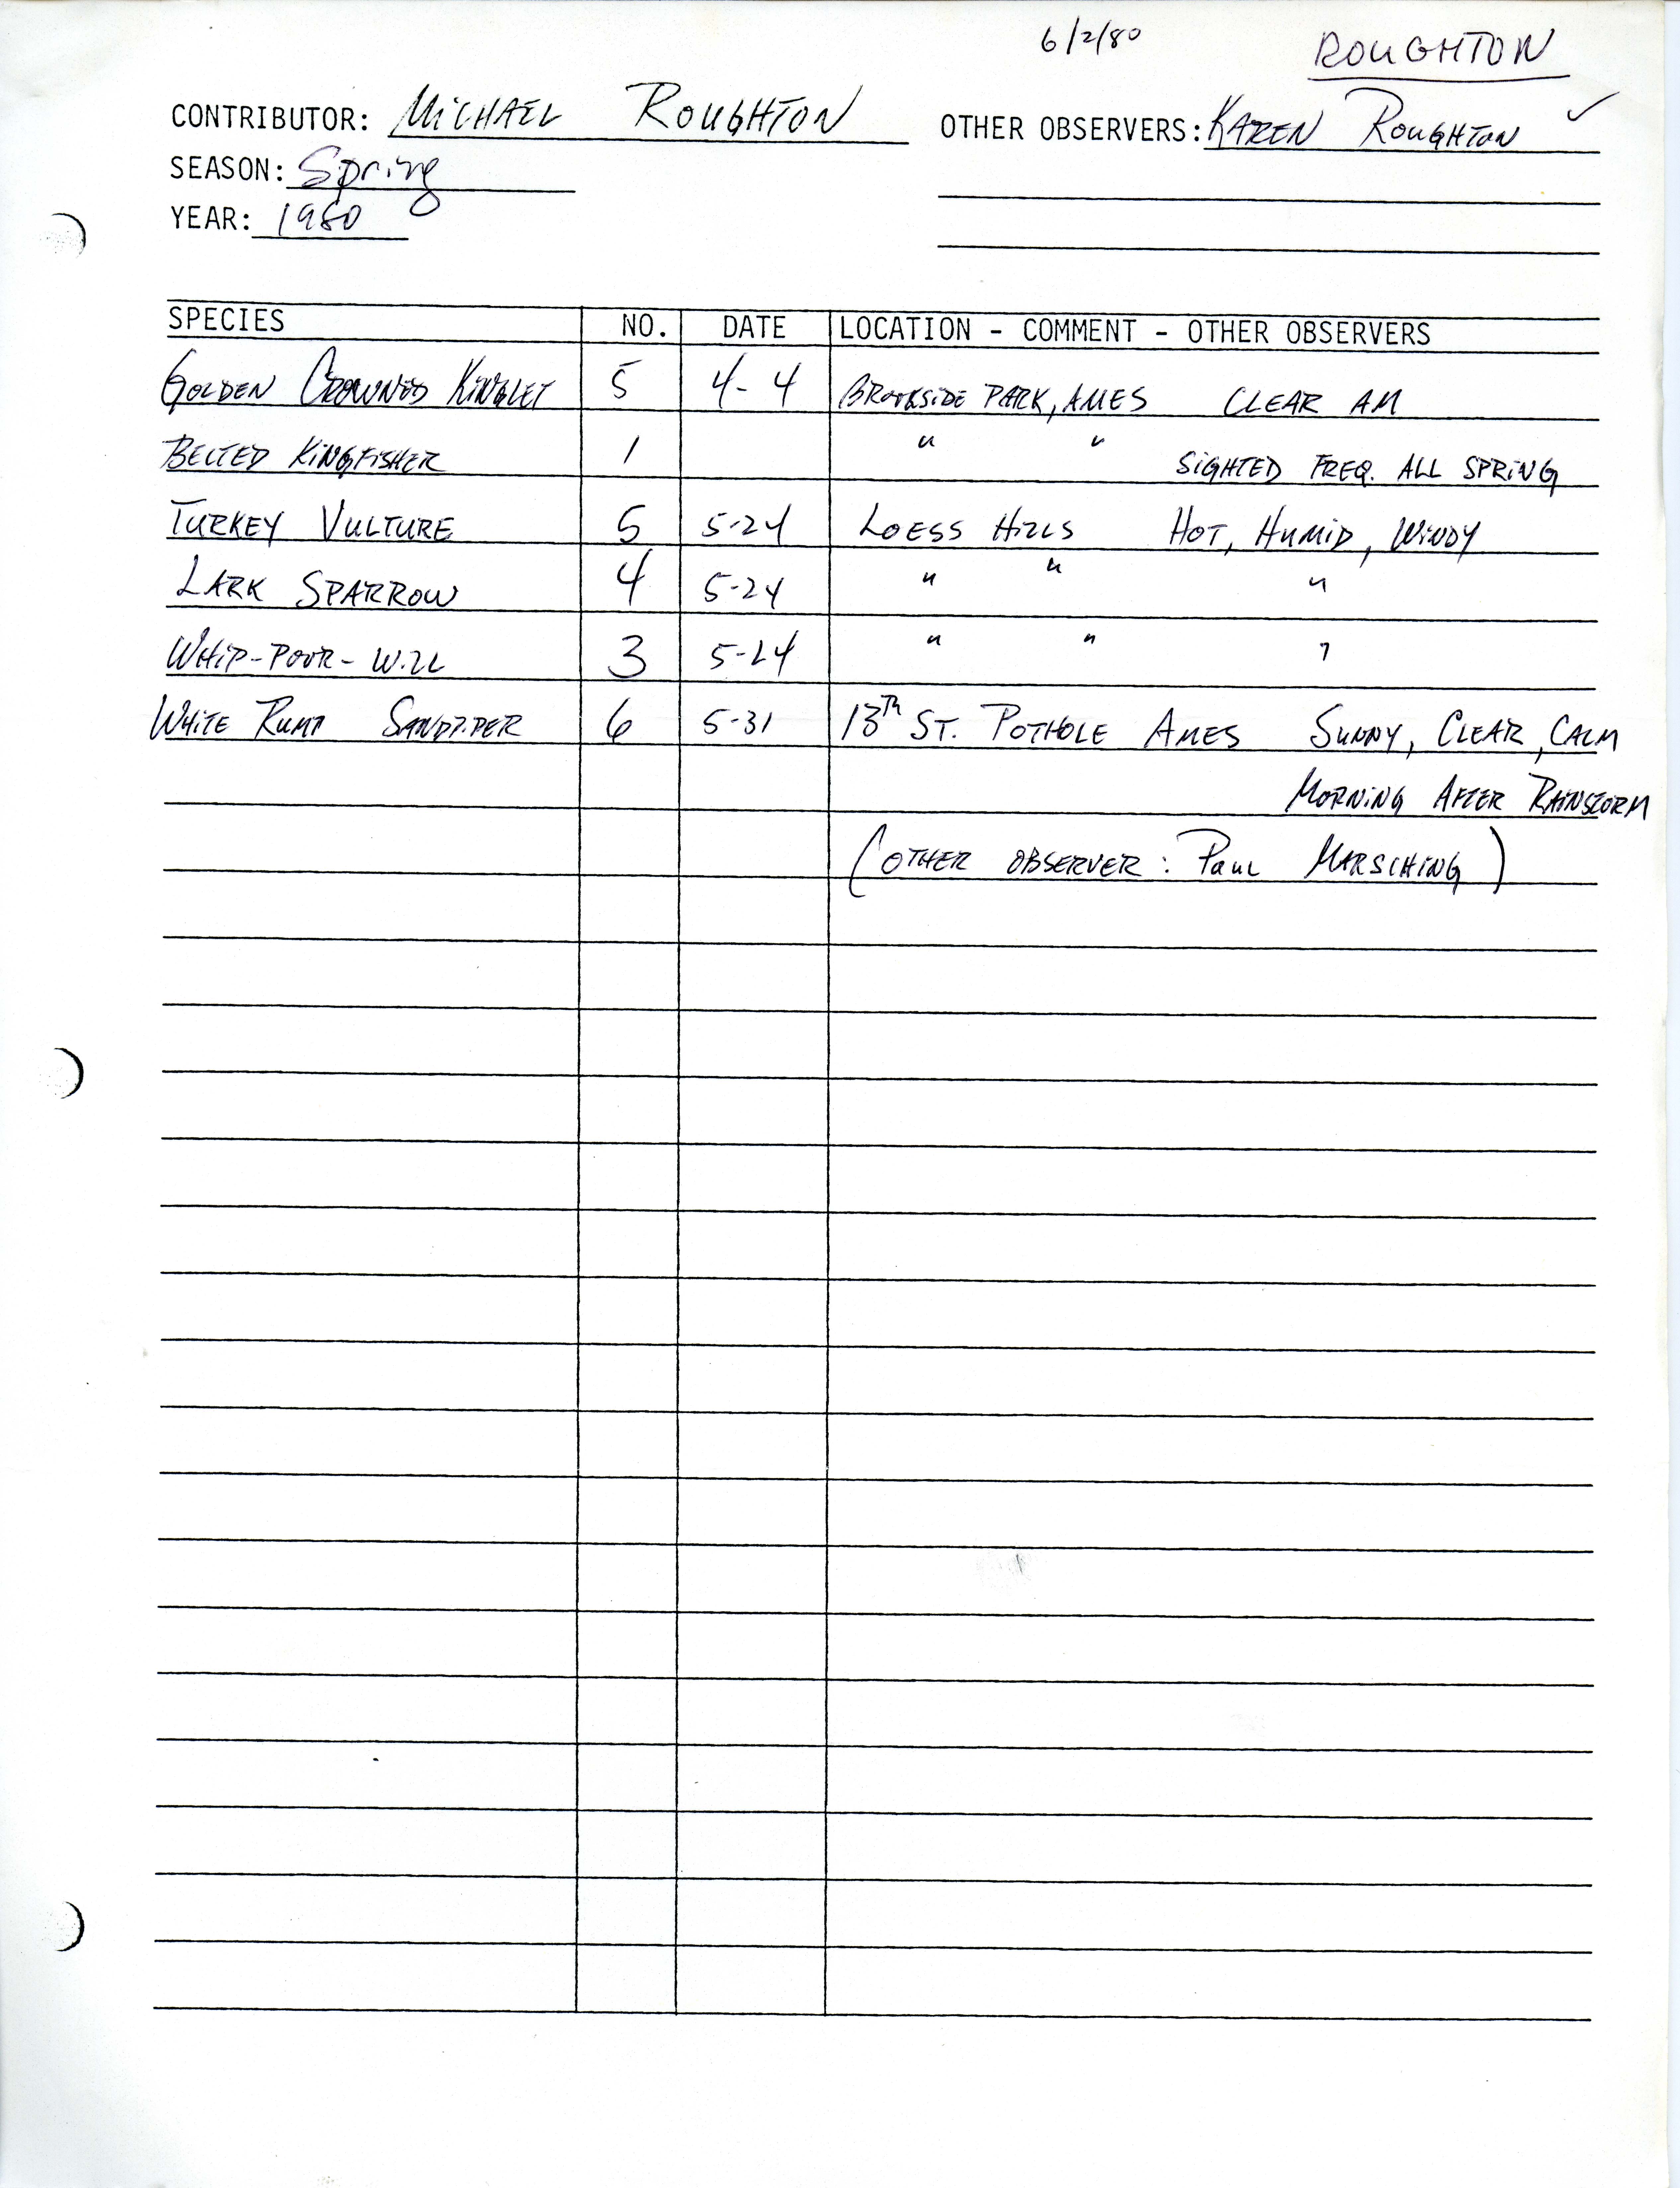 Field notes contributed by Michael Roughton, spring 1980